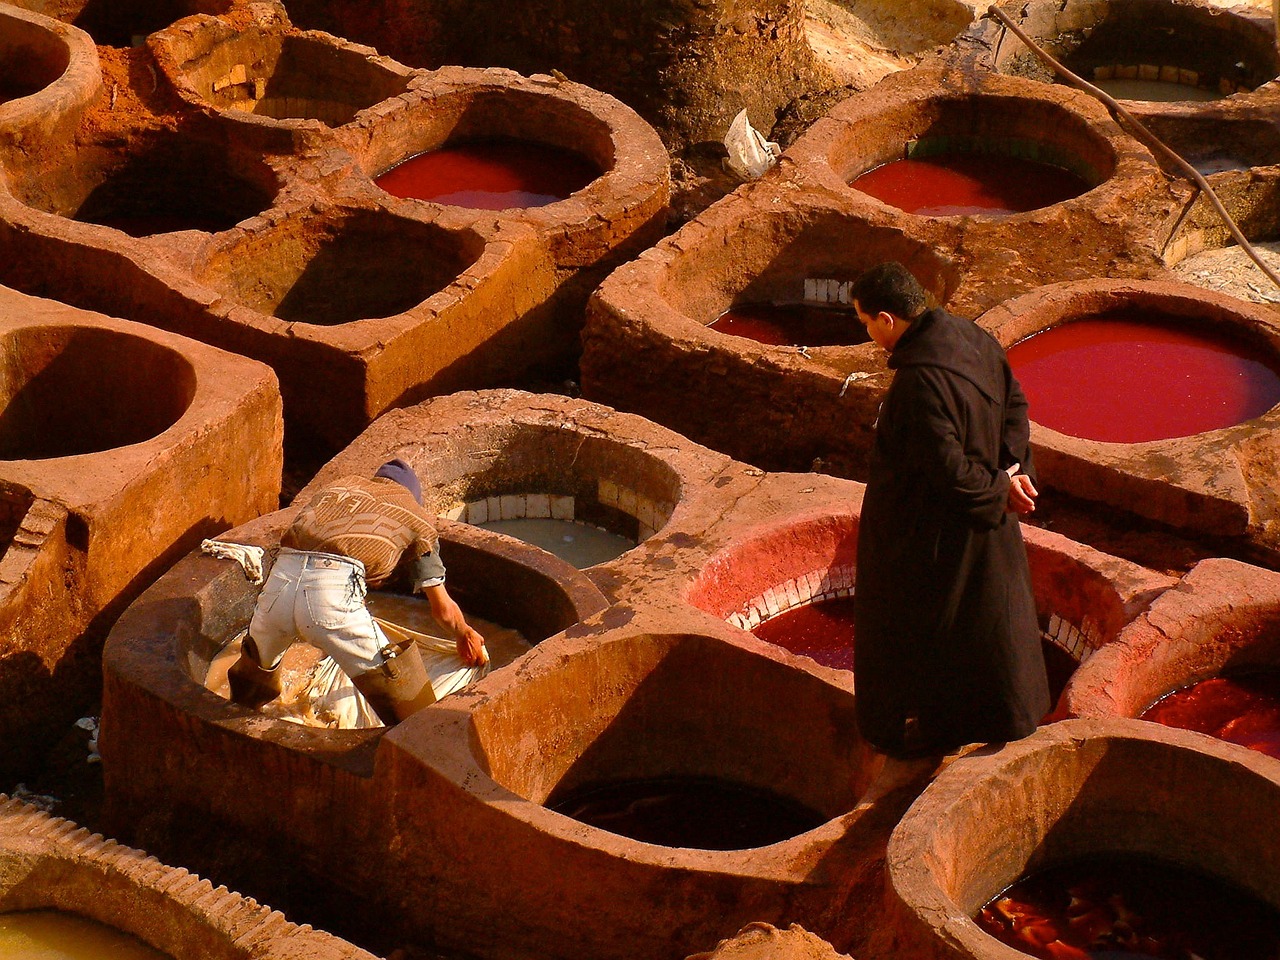 Moroccan leather tanners in Fez. Creative Commons image.